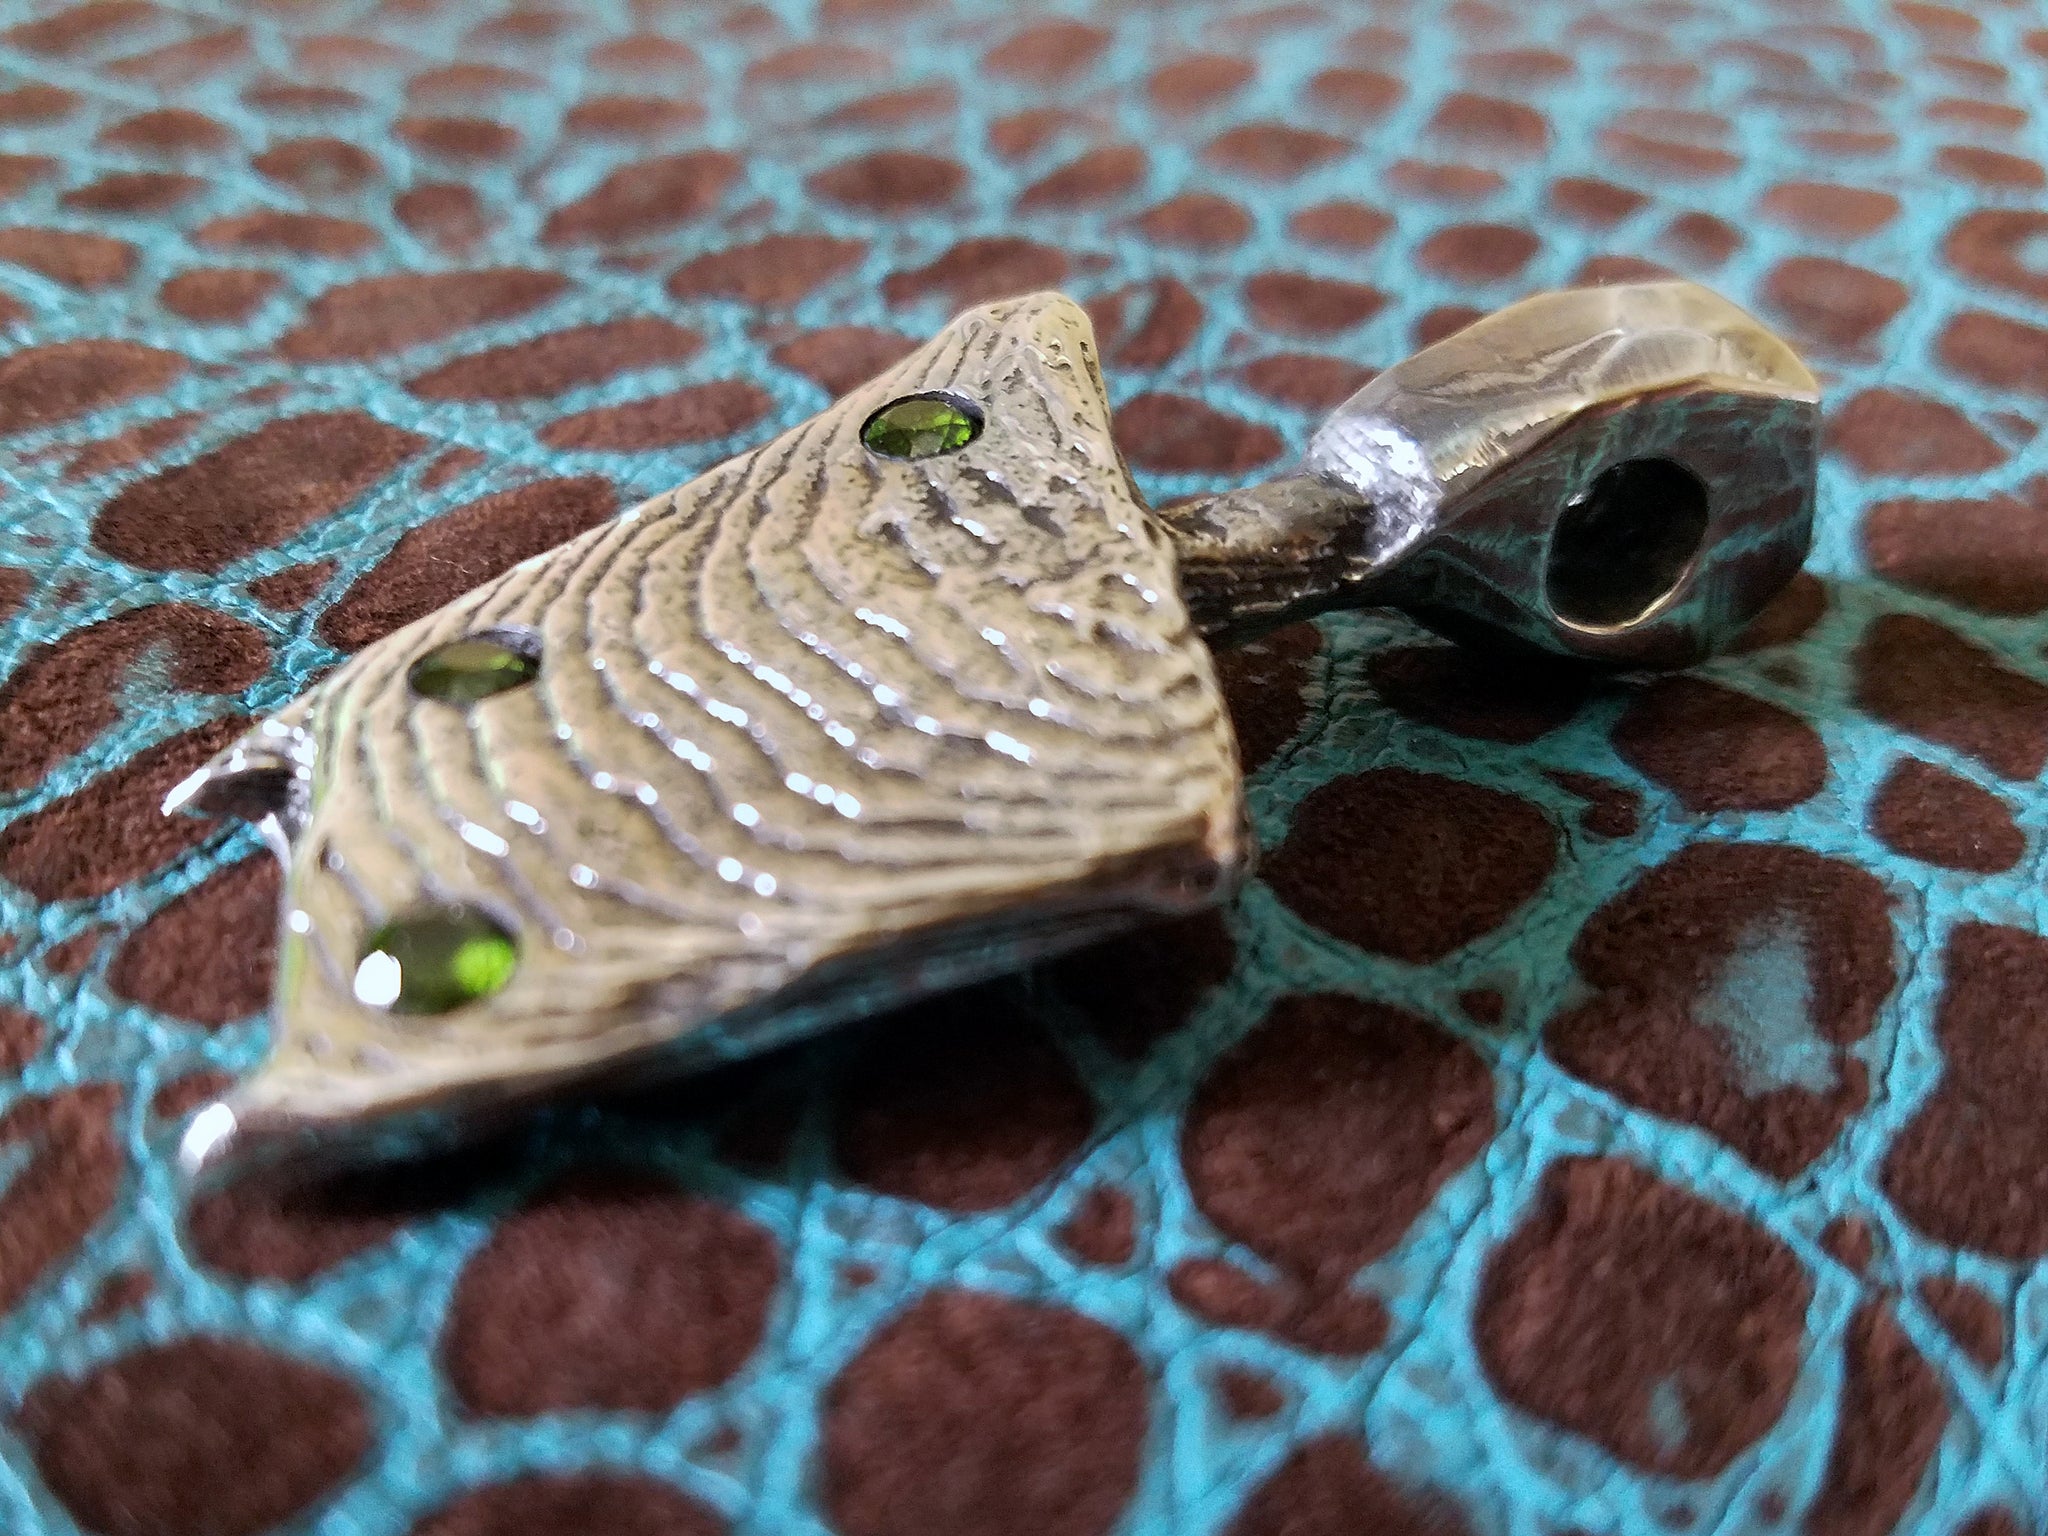 'Alien Artifact' Hand-carved Hand-poured Cuttlefish Cast Pendant #8 by Phantom